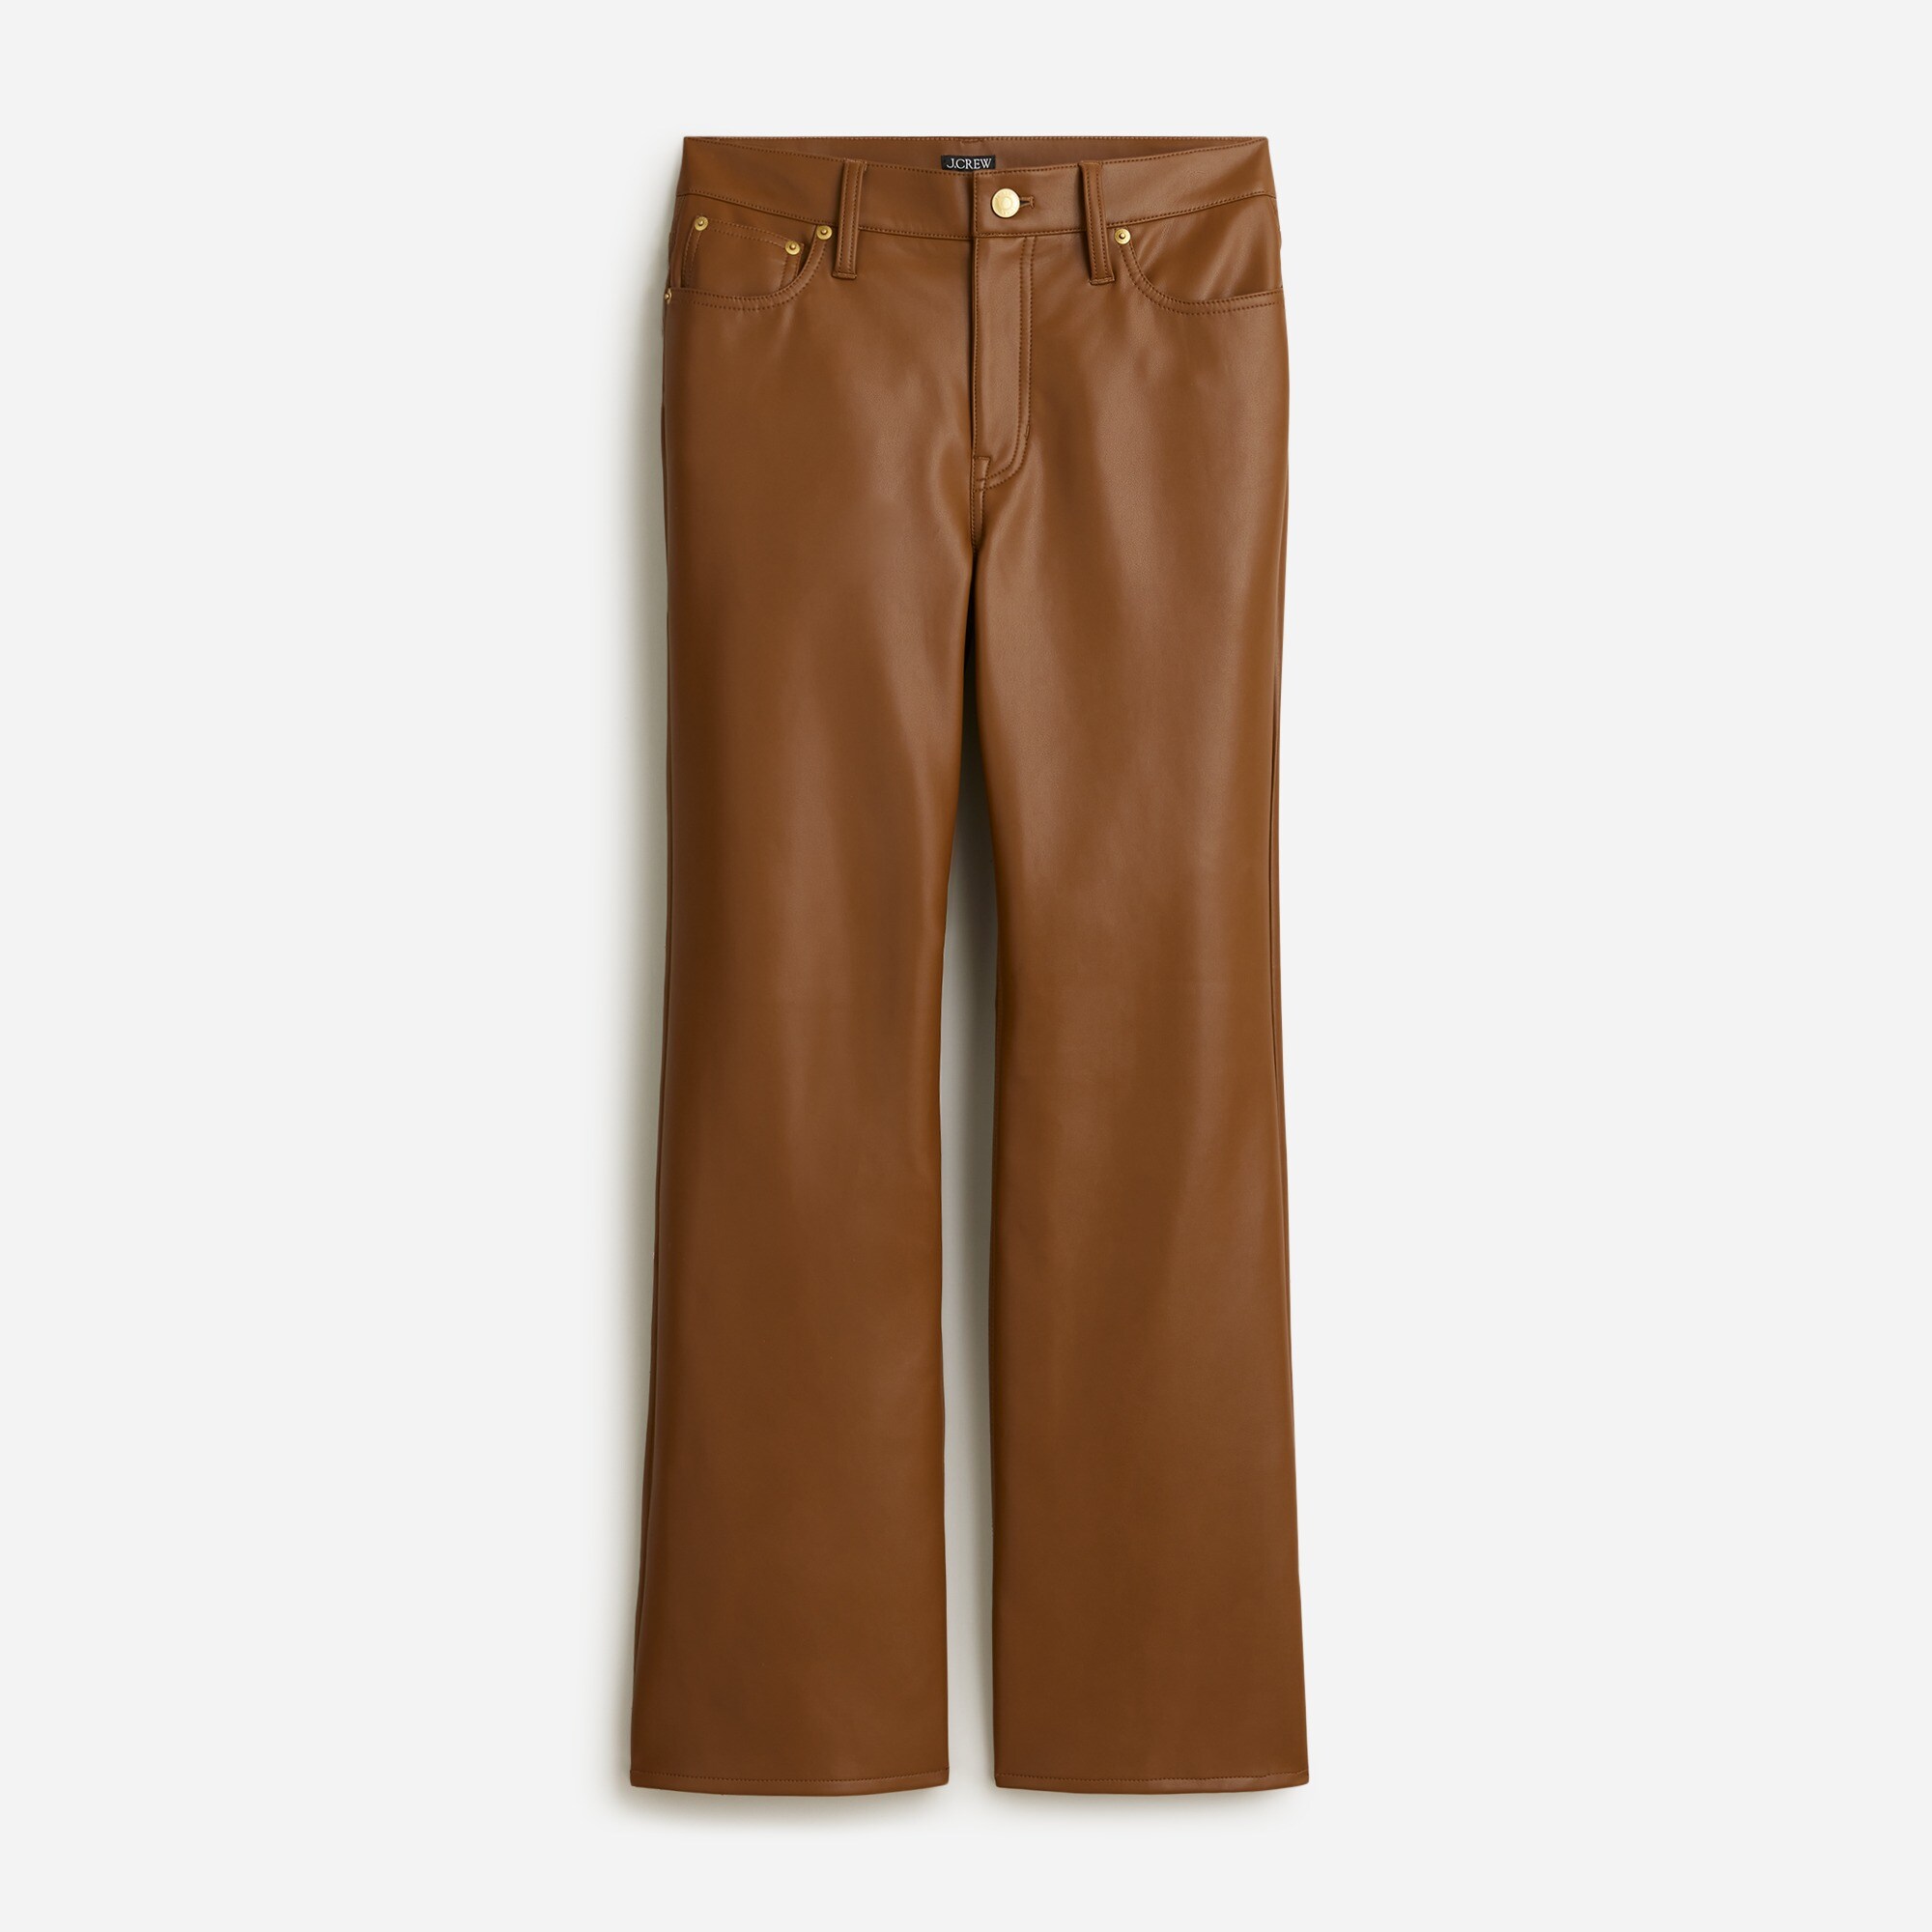  Petite slim wide-leg pant in faux leather